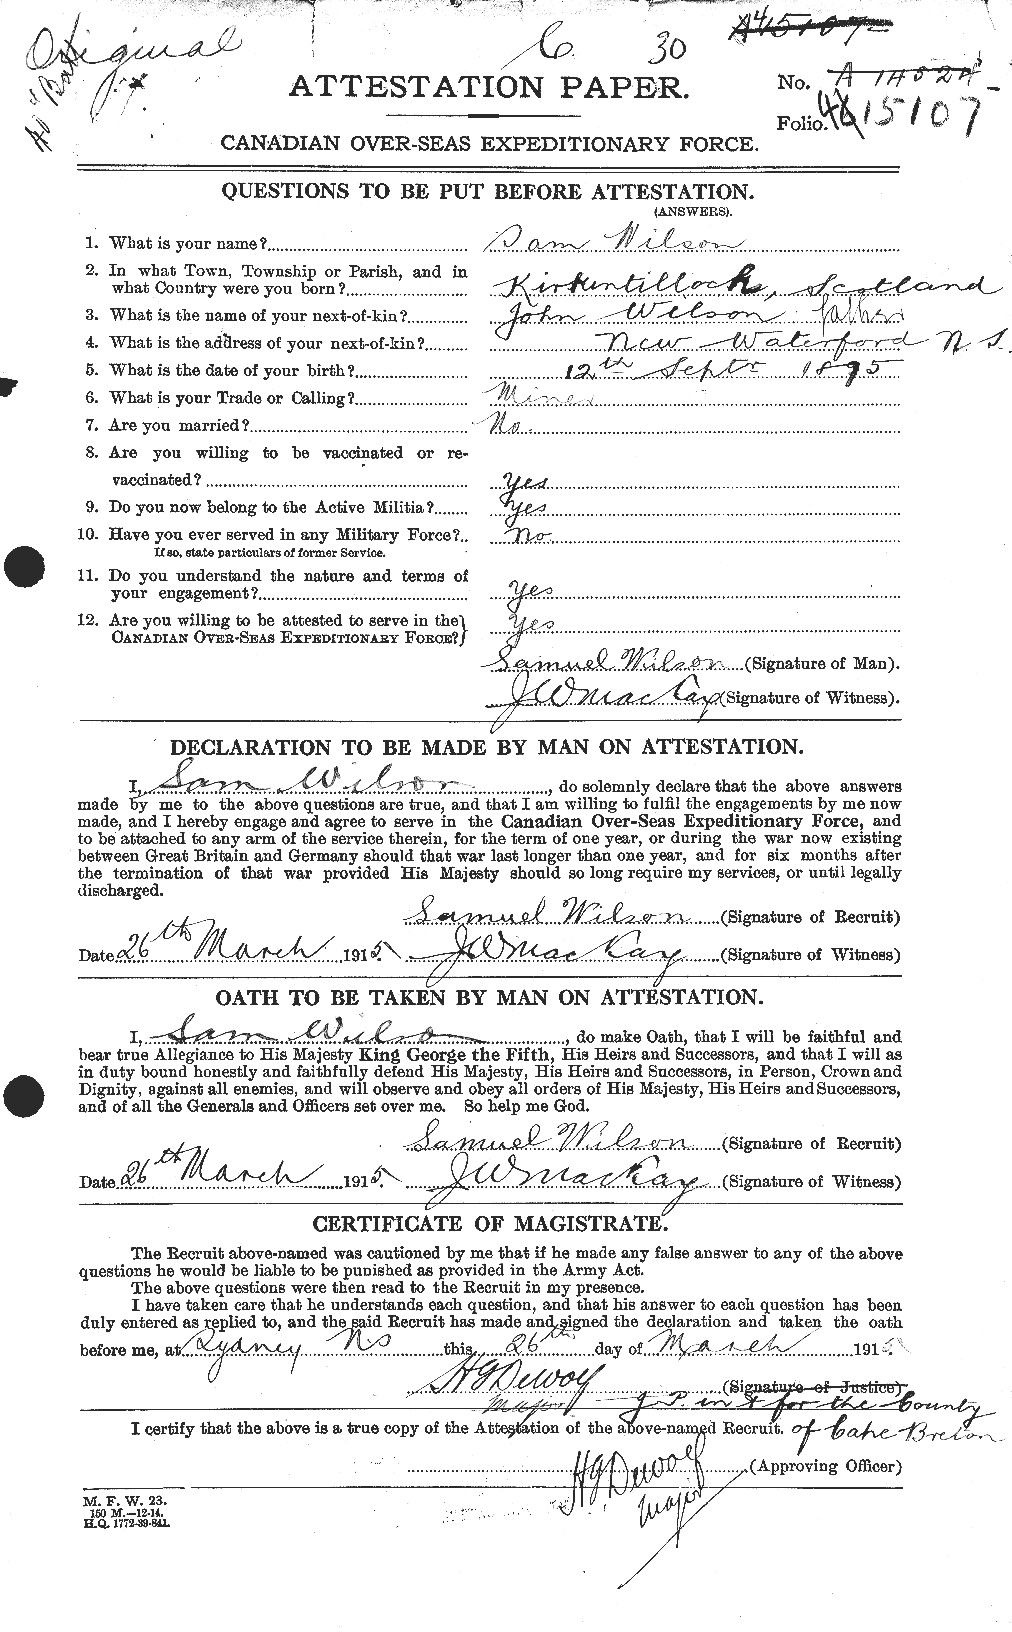 Personnel Records of the First World War - CEF 681087a